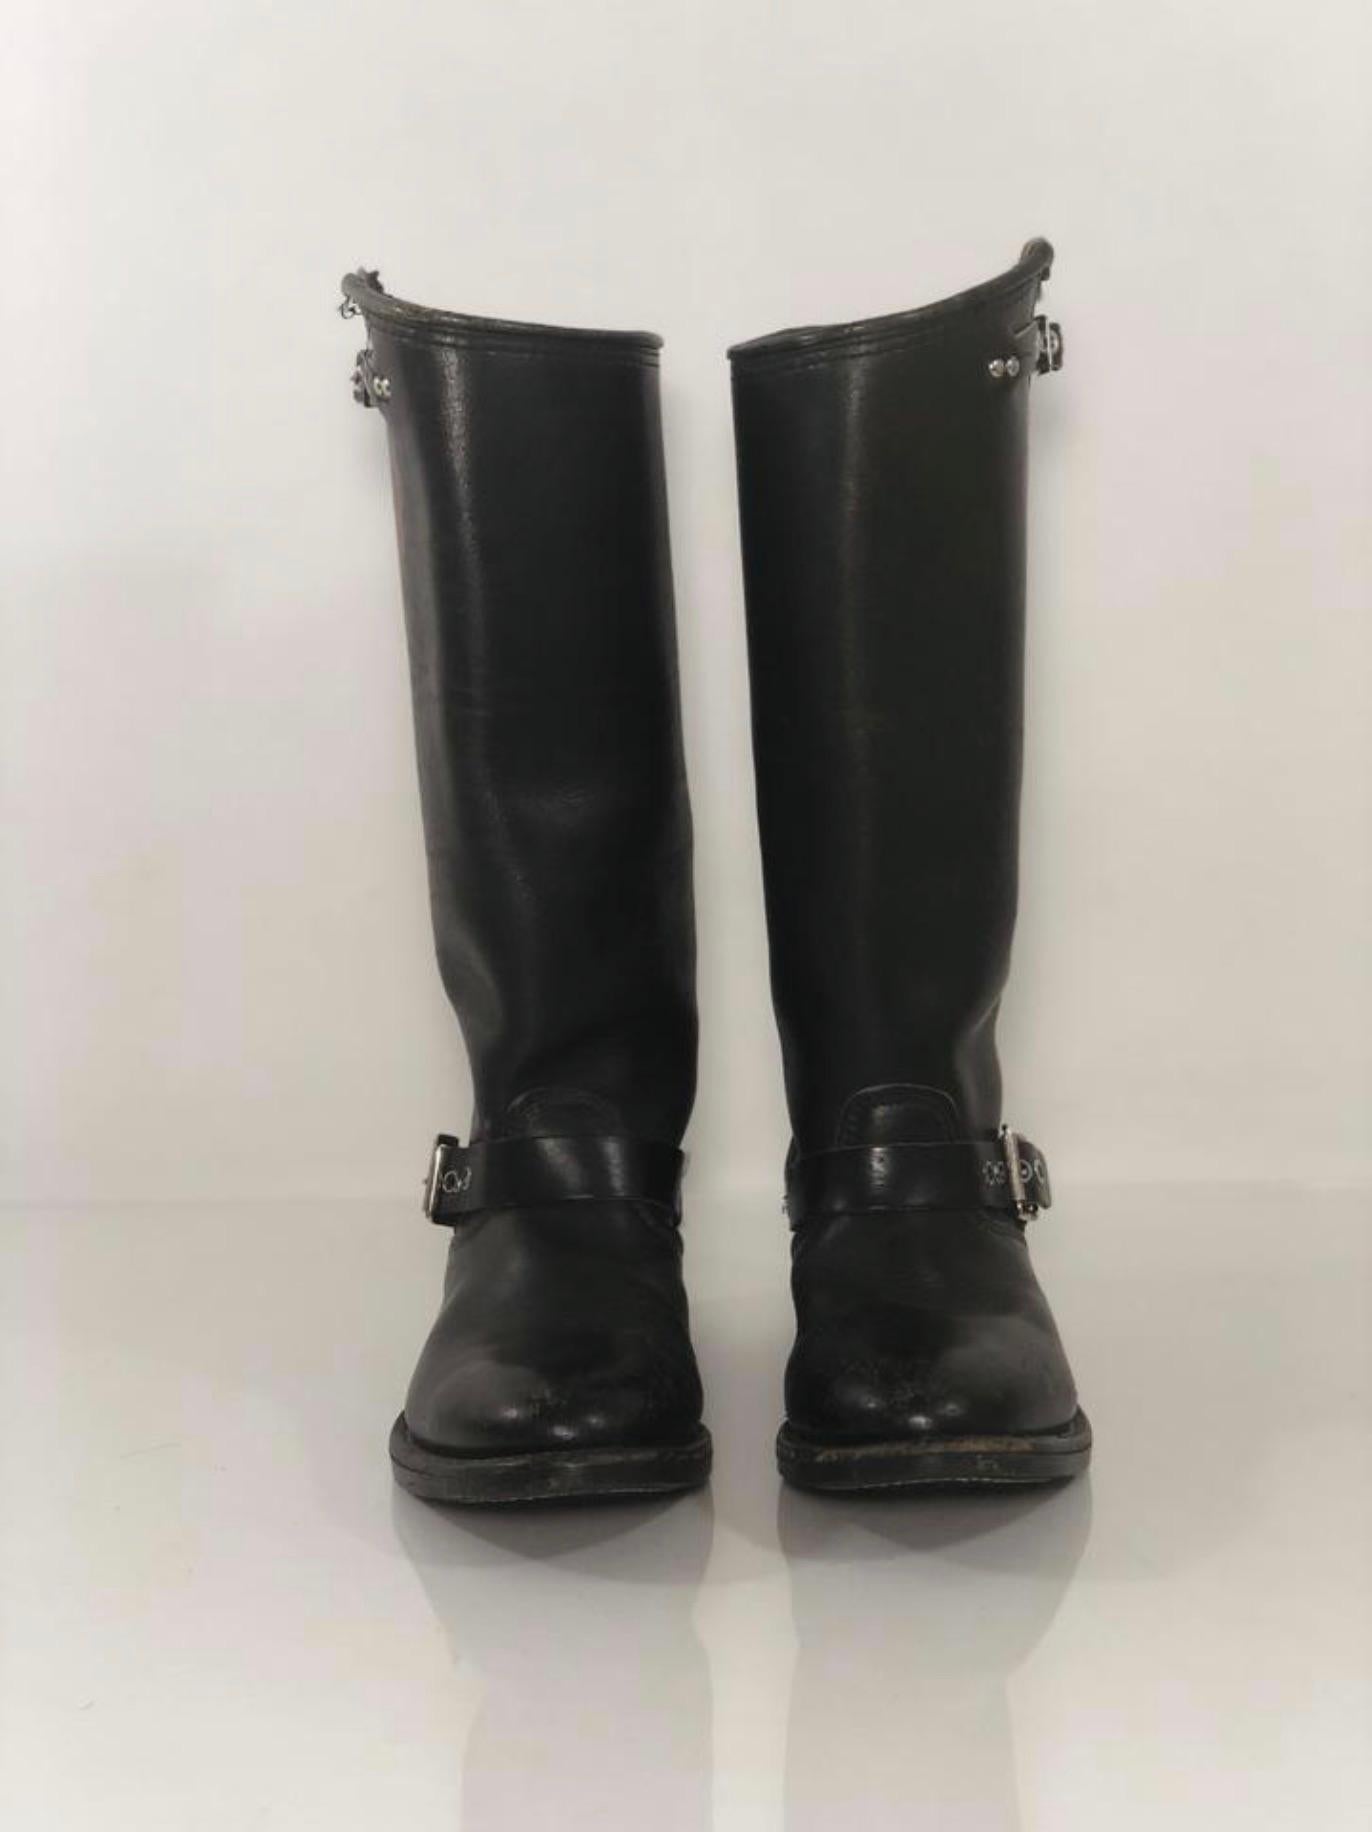 MODEL - Harley Davidson Black Leather Tall Biker Buckle Boots

CONDITION - GOOD - Scuffing on toe

SKU - AIS

ORIGINAL RETAIL PRICE - 495 + tax

SIZE - US 7

MODEL DETAILS - 7R010151 8650

MATERIAL - Leather 

COLOR - Black

COMES WITH - No